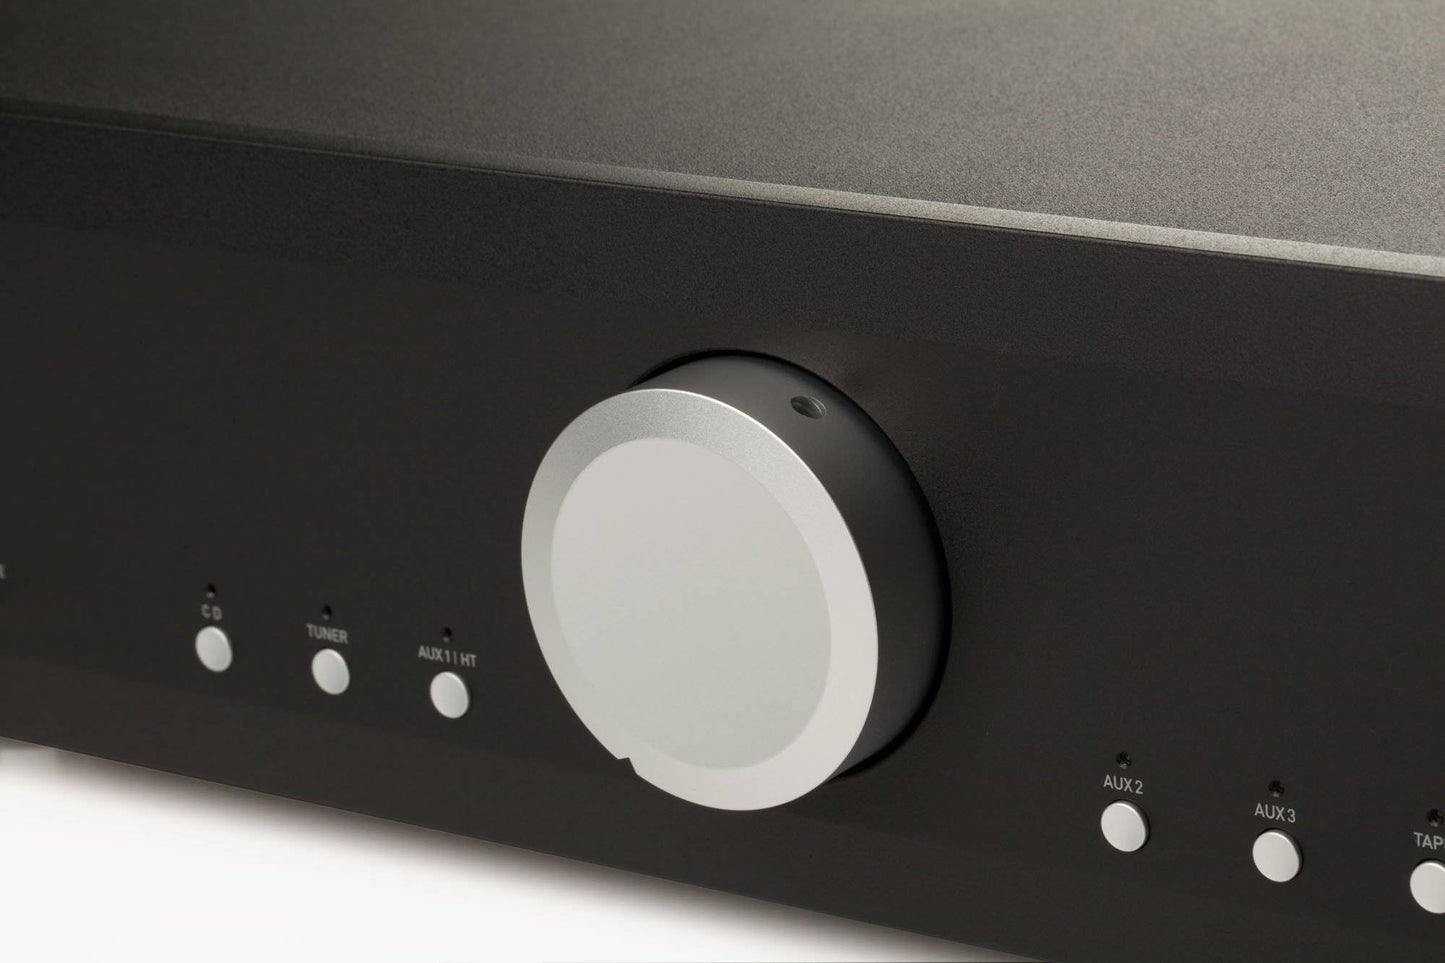 Musical Fidelity M2si Integrated Amplifier